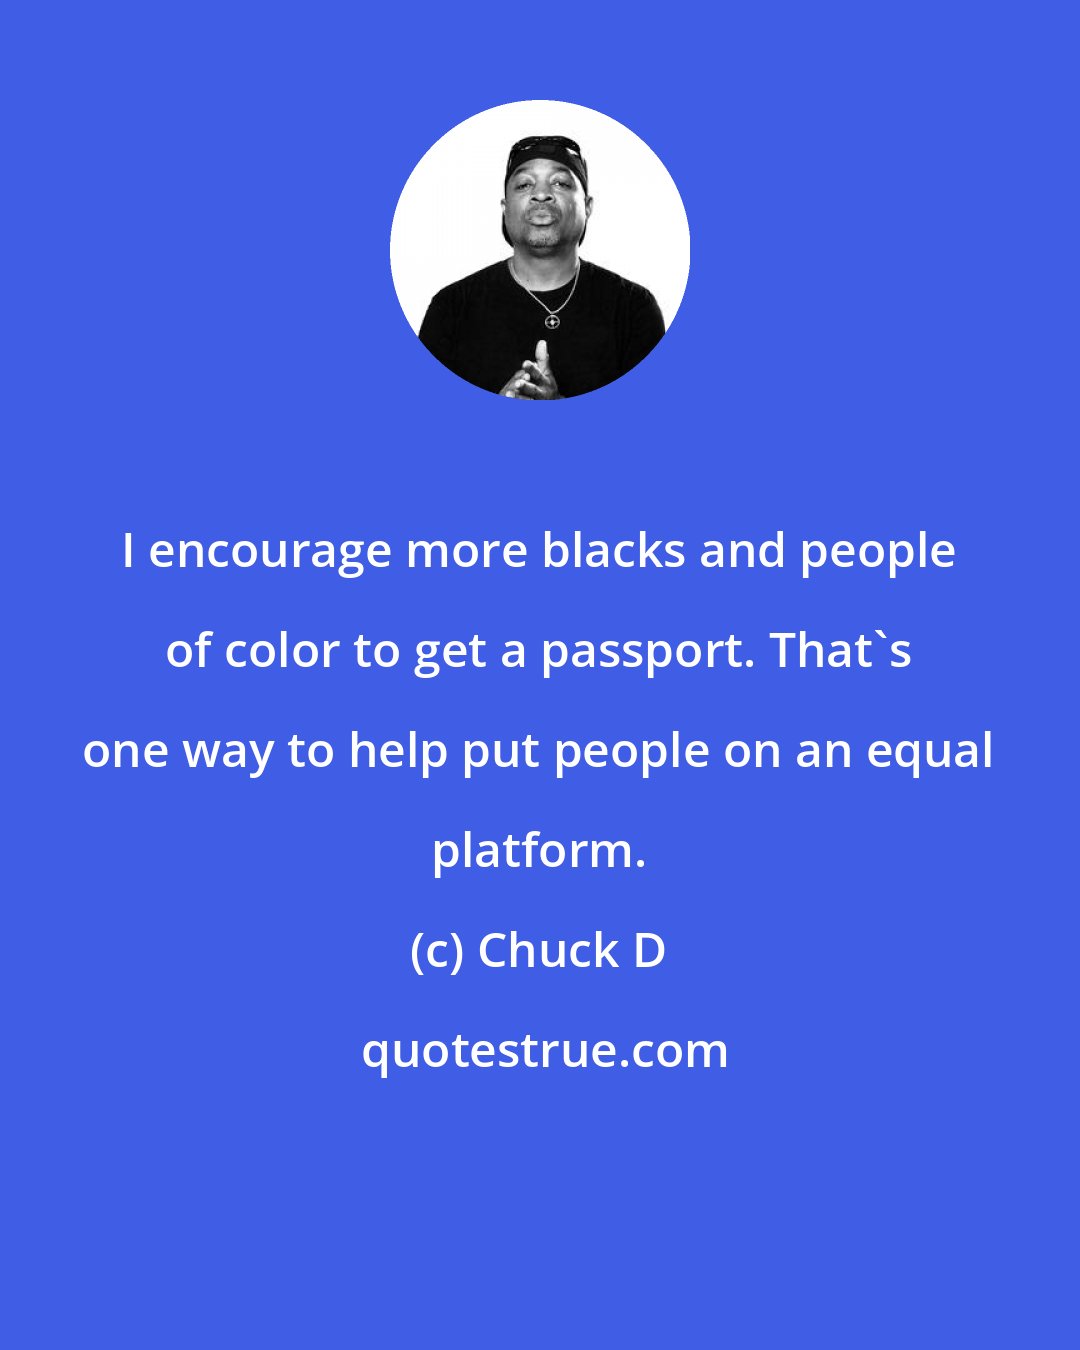 Chuck D: I encourage more blacks and people of color to get a passport. That's one way to help put people on an equal platform.